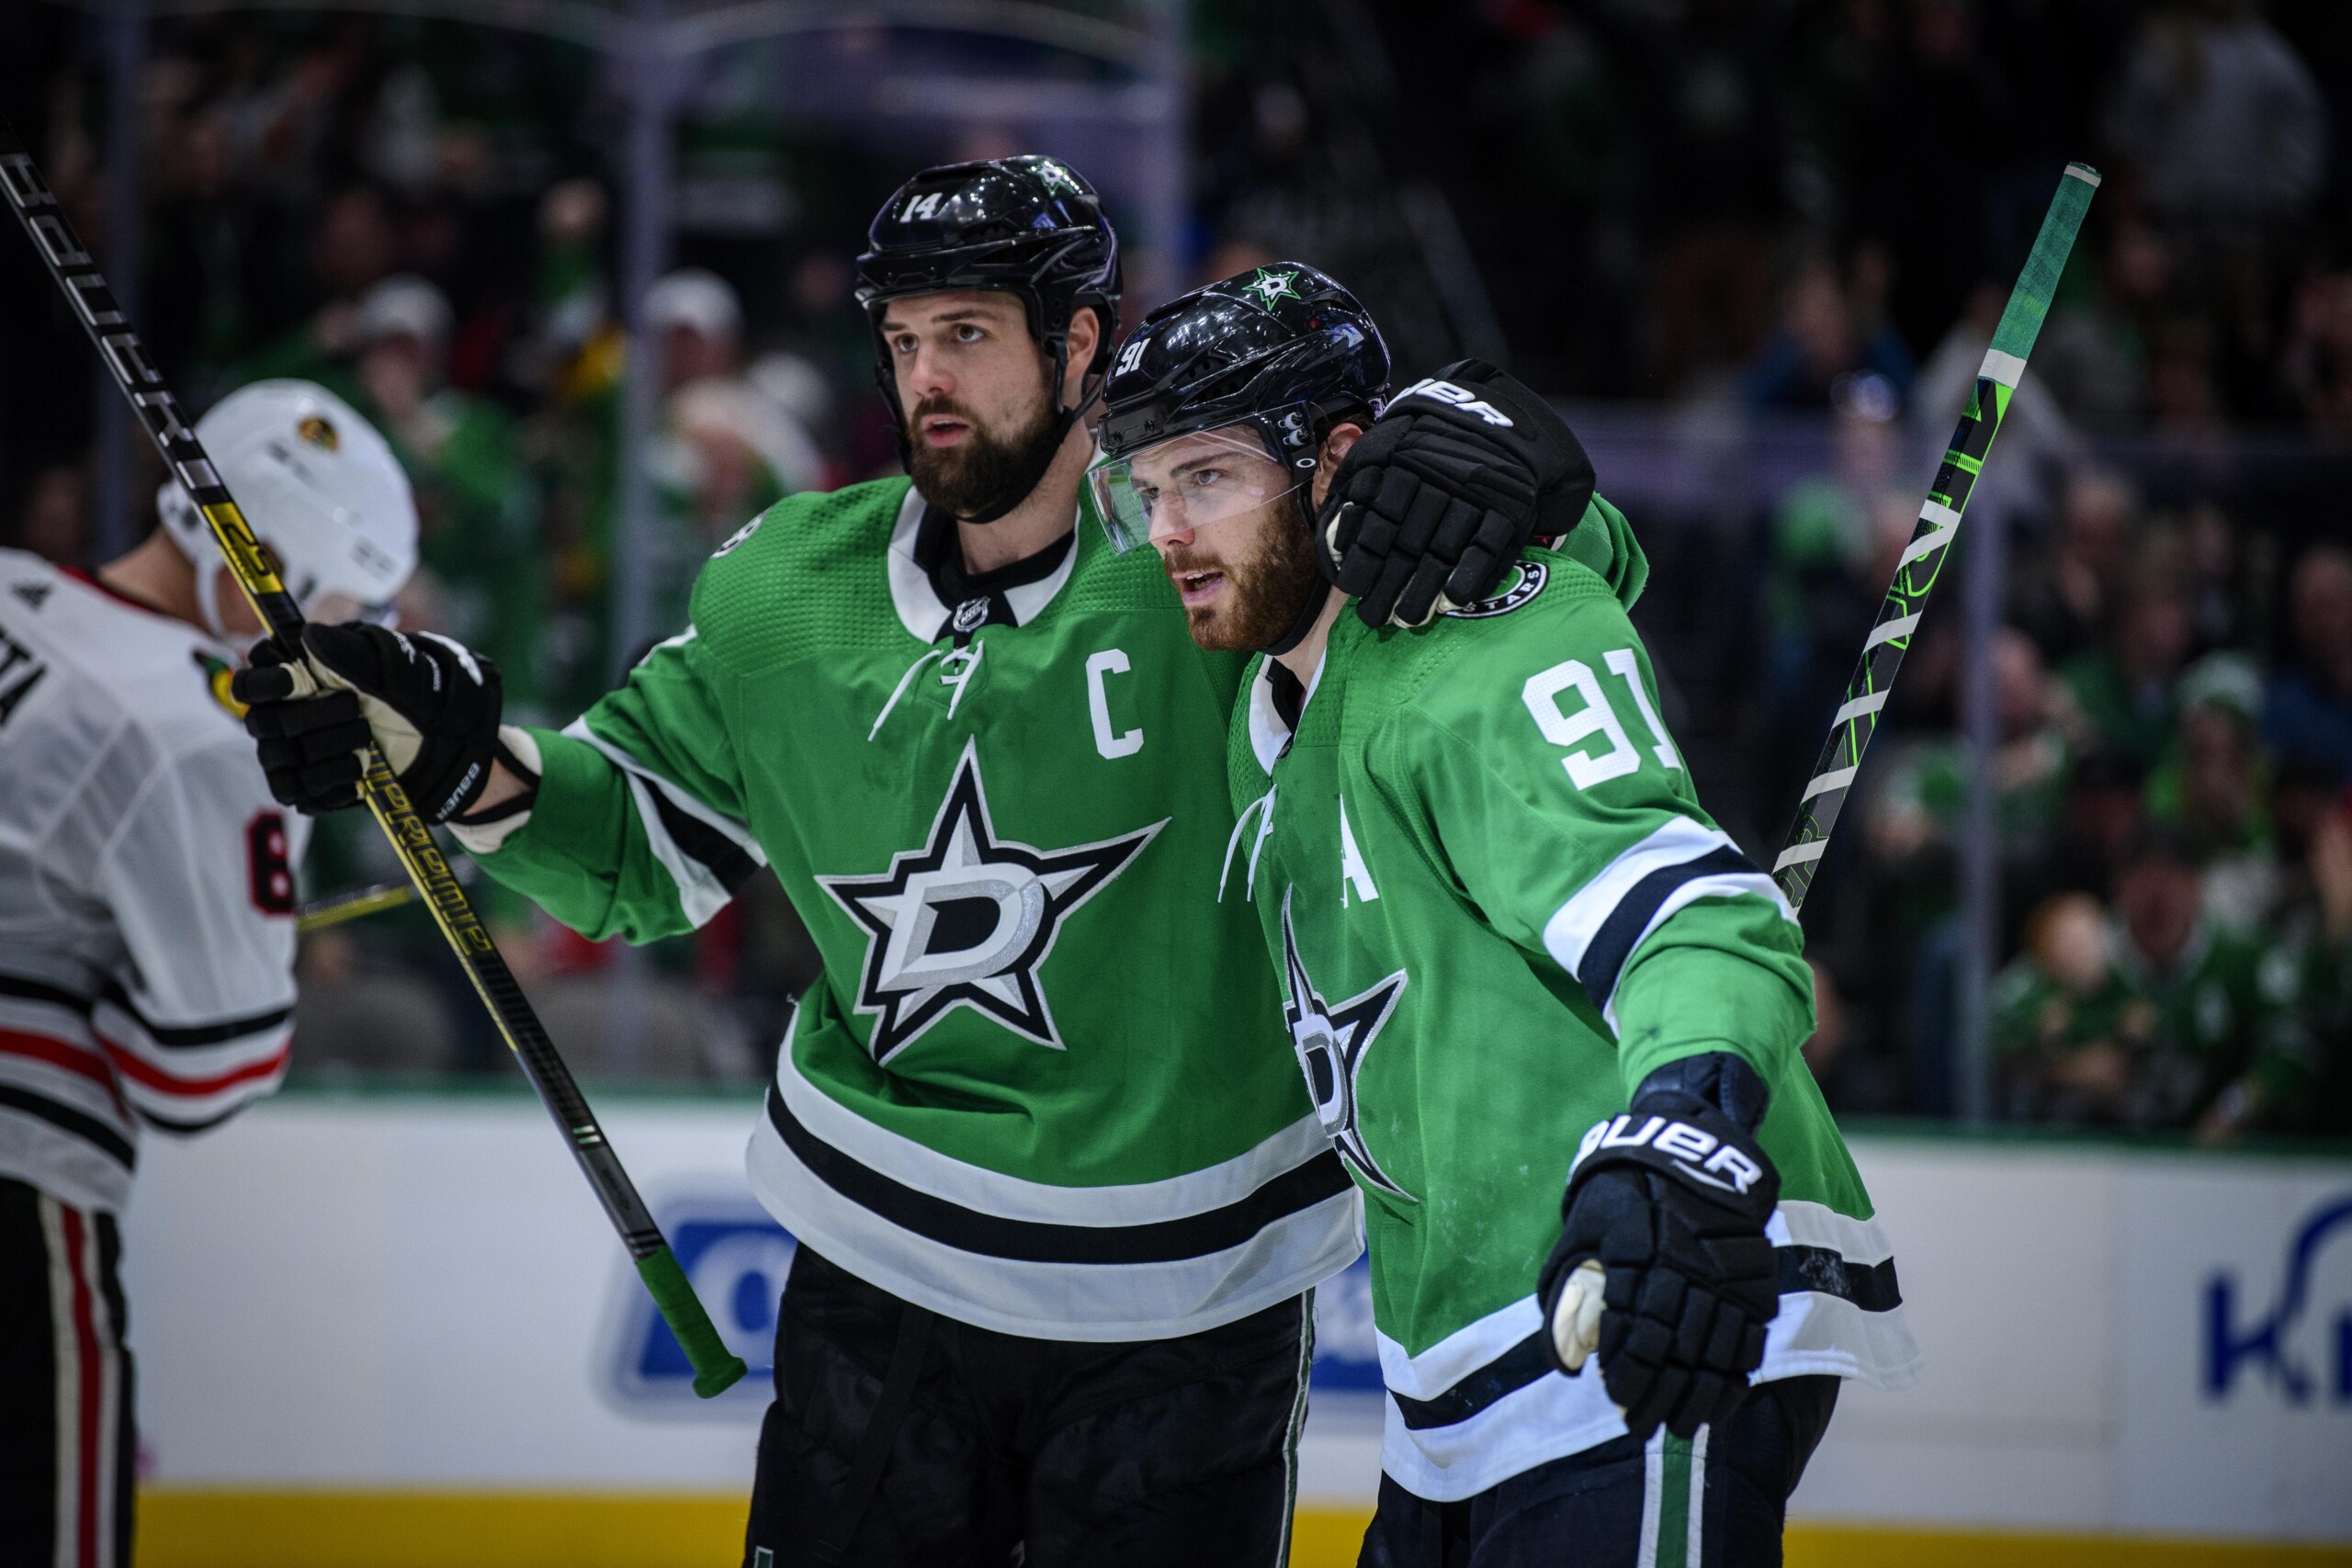 Tyler Seguin rips invisible monkey off Jamie Benn's back after